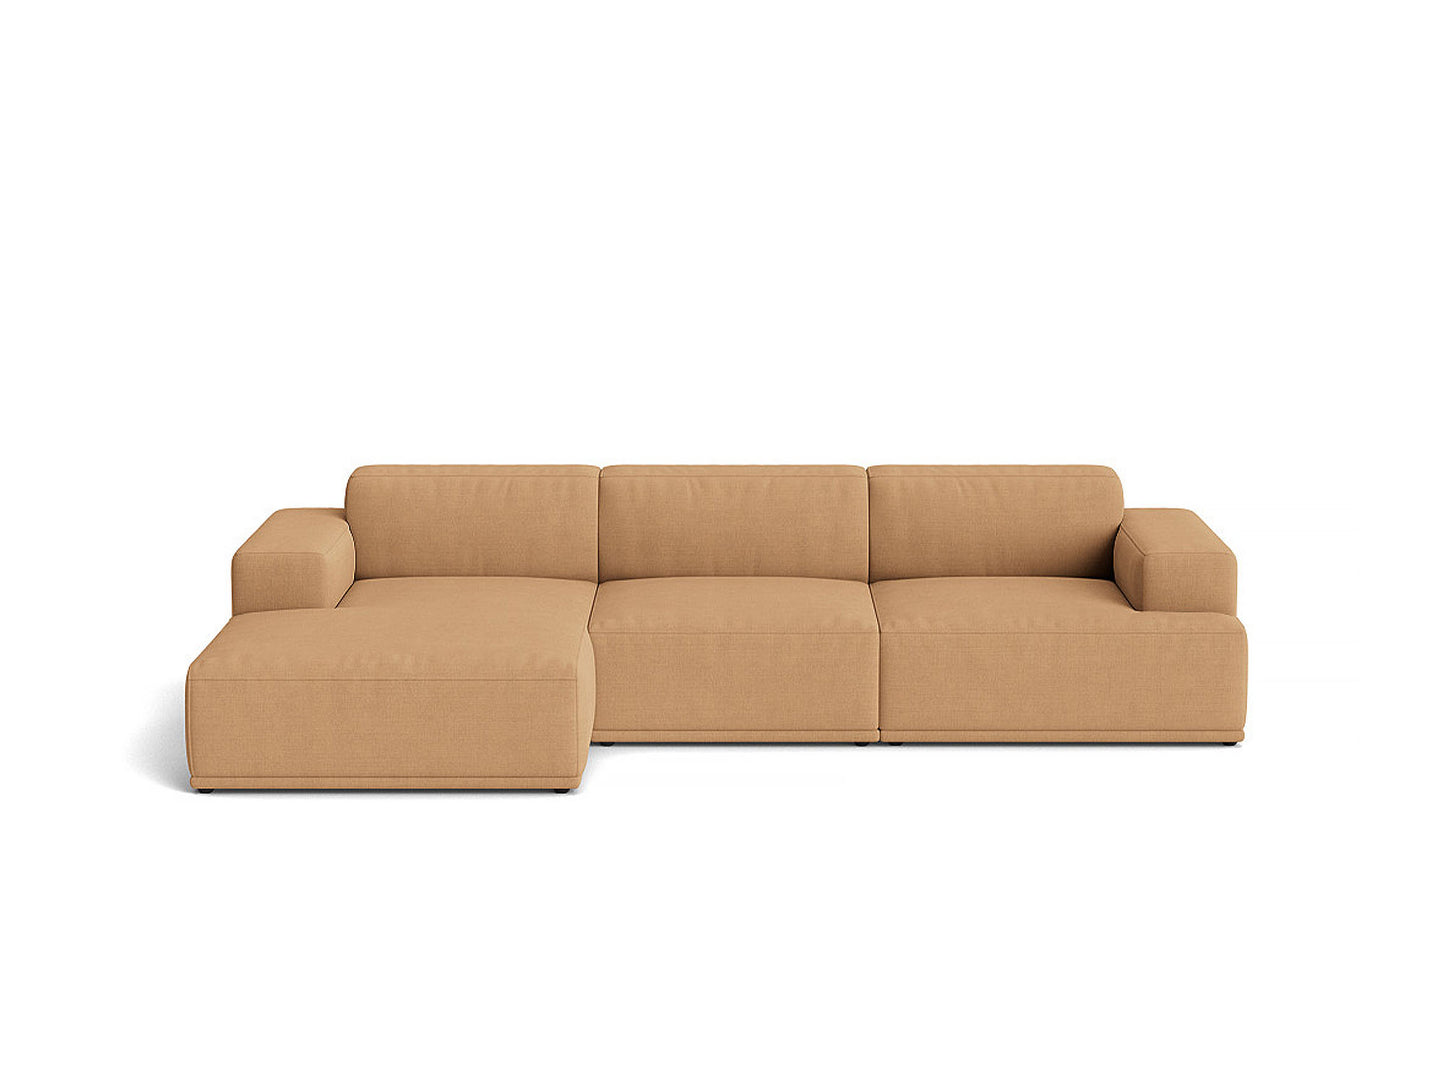 Connect Soft 3-Seater Modular Sofa by Muuto - Configuration 3 / fiord 451